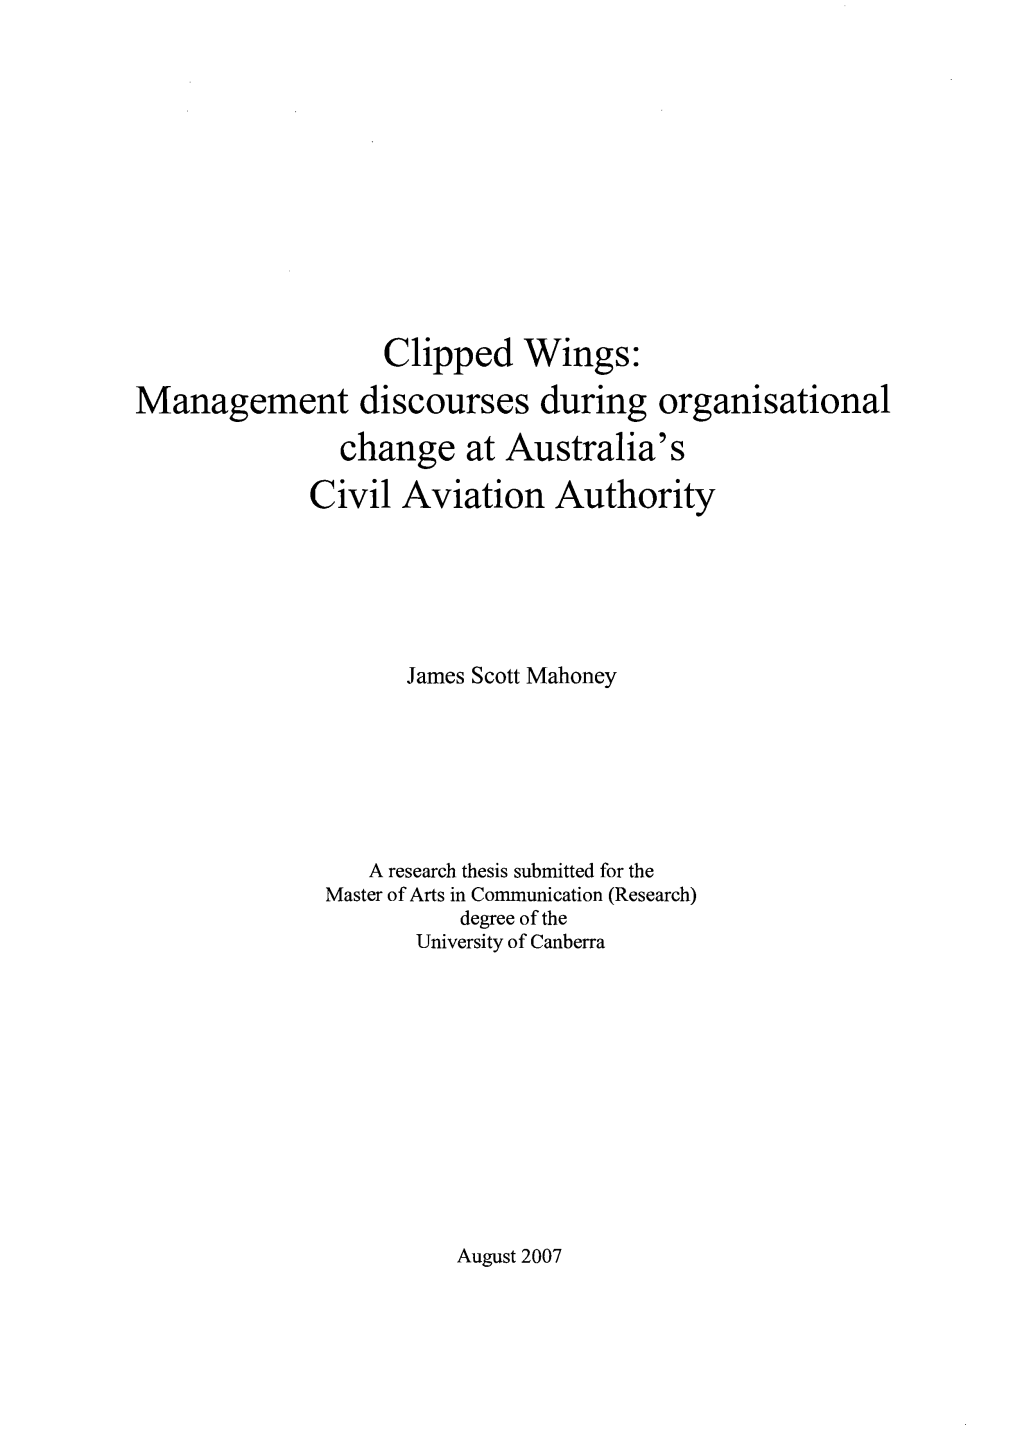 Clipped Wings: Management Discourses During Organisational Change at Australia's Civil Aviation Authority